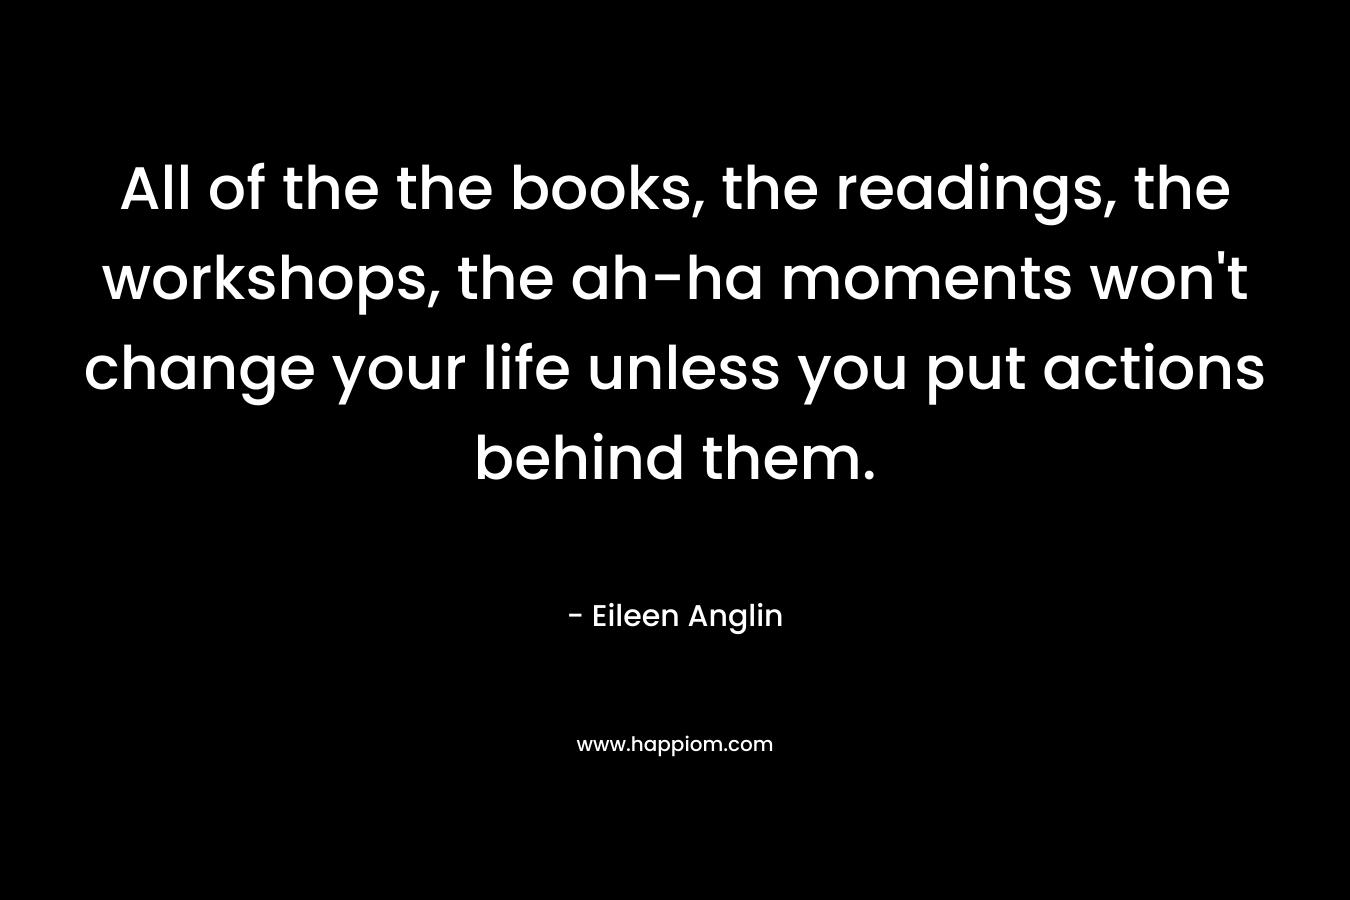 All of the the books, the readings, the workshops, the ah-ha moments won’t change your life unless you put actions behind them. – Eileen Anglin